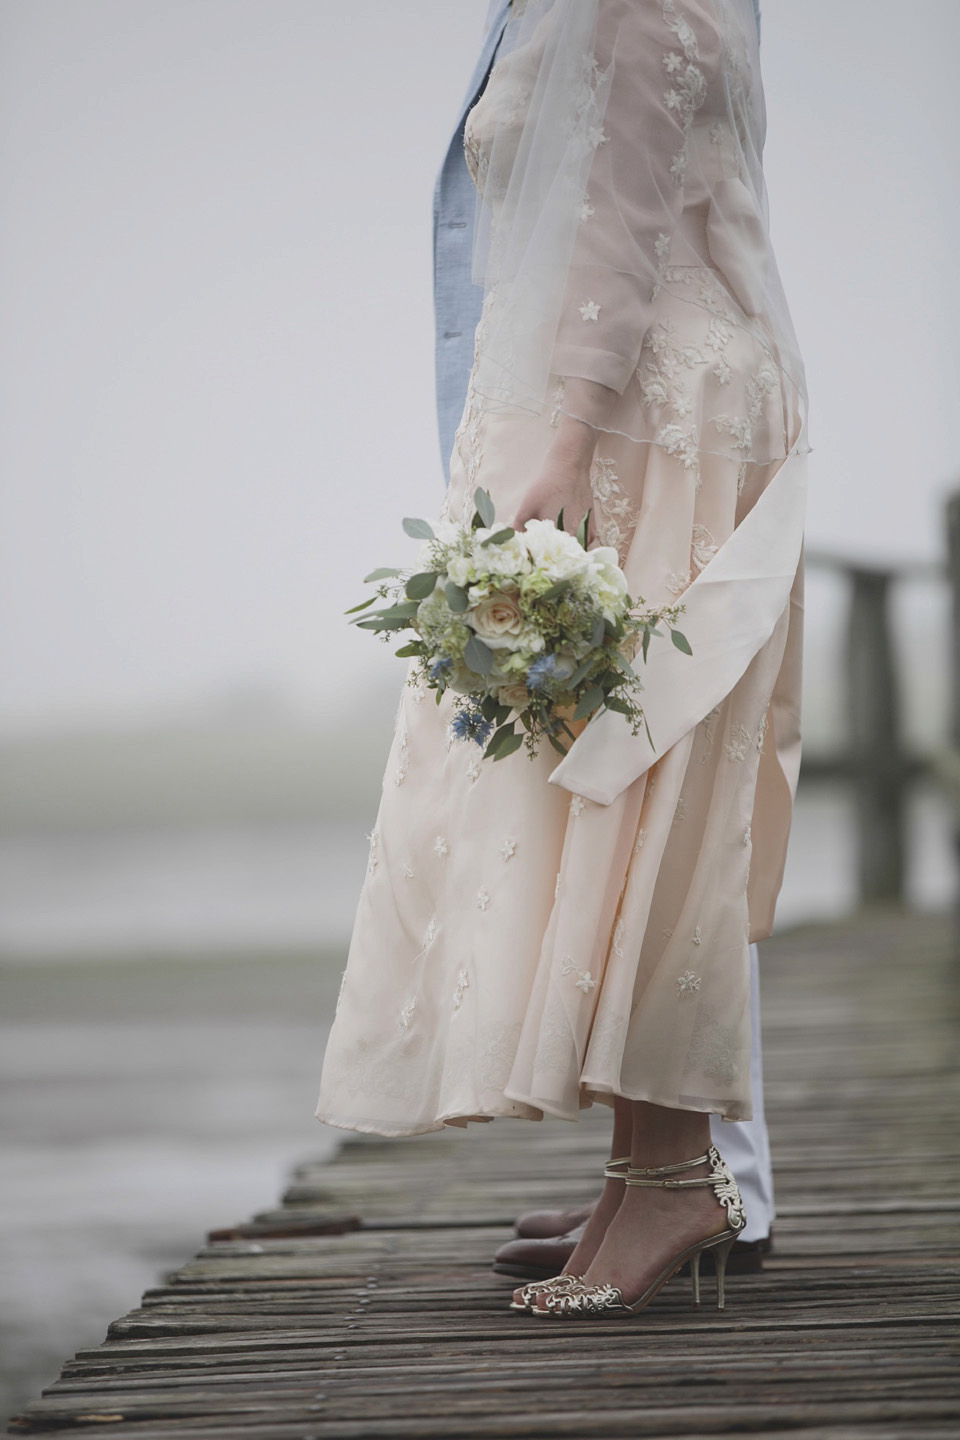 A bride wearing a ballerina length dress and Juliet cap veil for her soft blush pink and liberty print inspired wedding in Scotland.  Photography by Mirrorbox Photography.